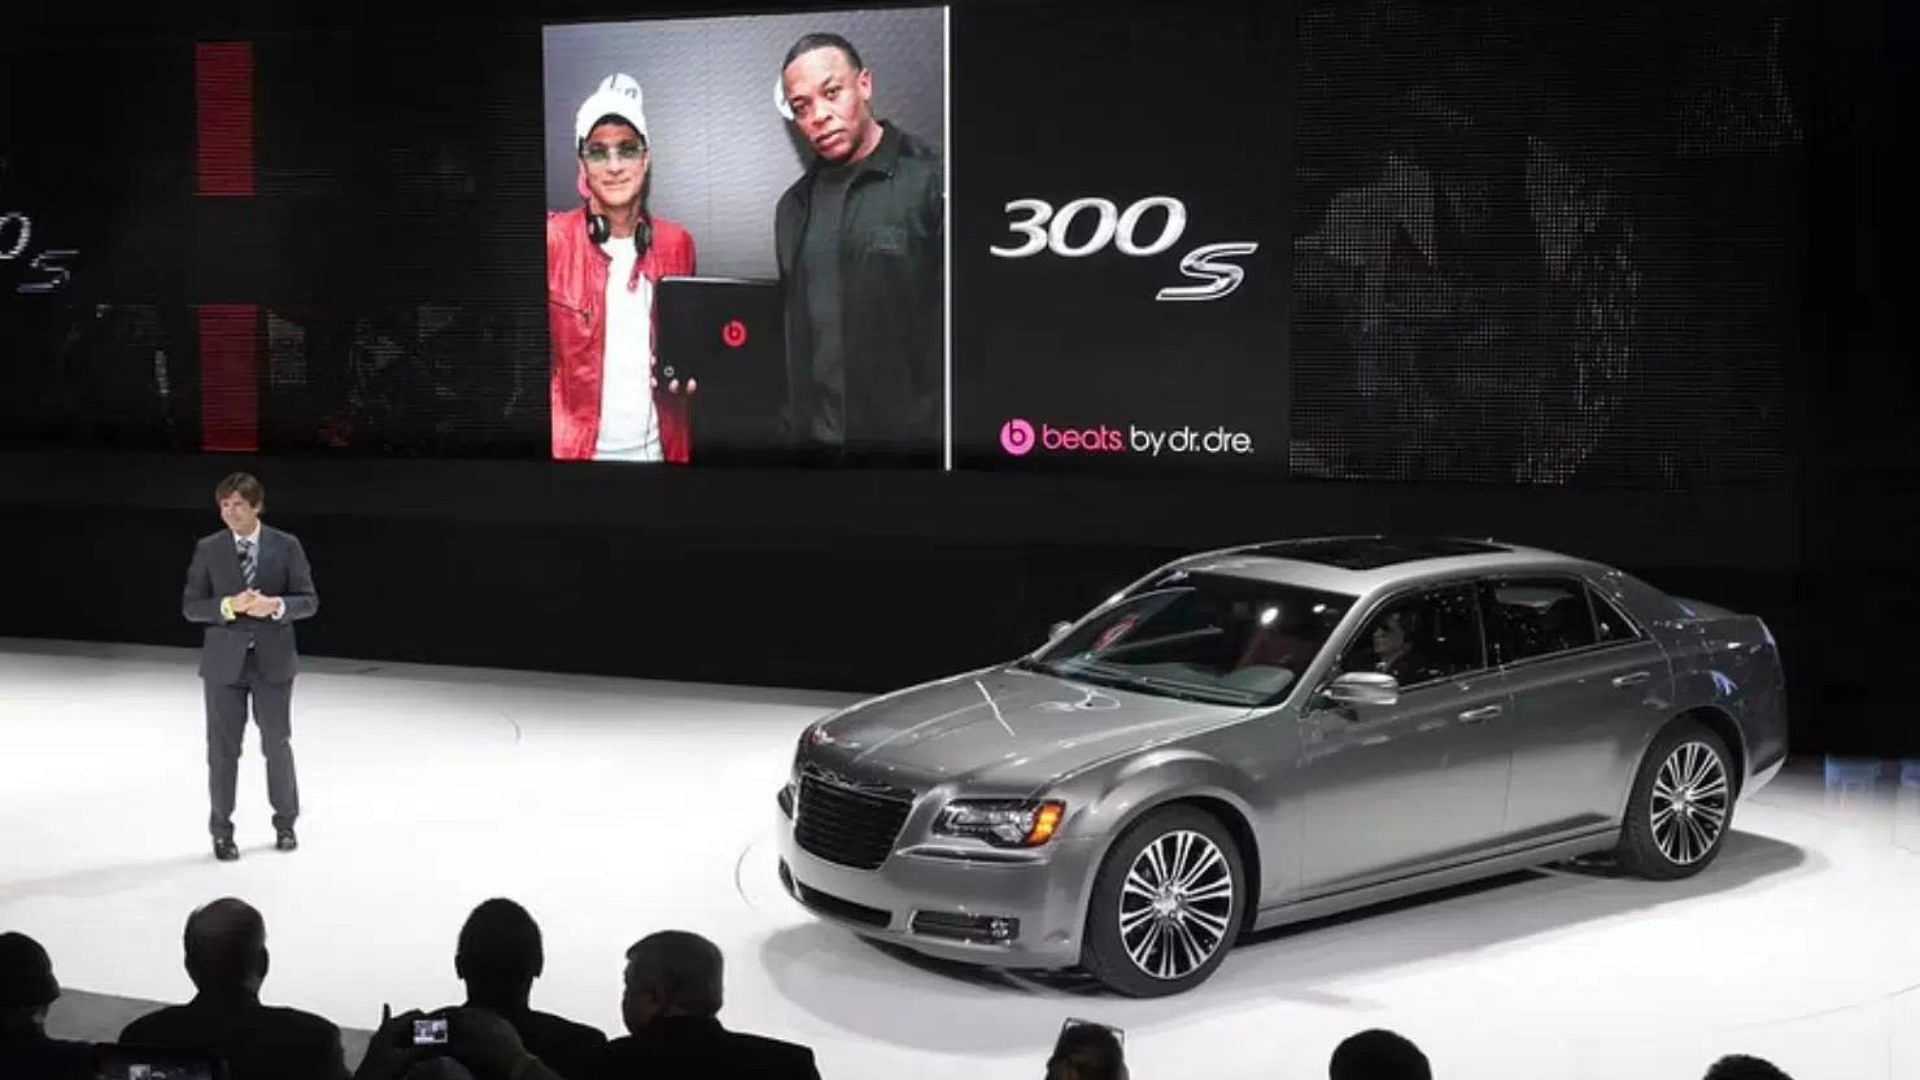 Dr Dre's Chrysler 300S with Beats Speakers